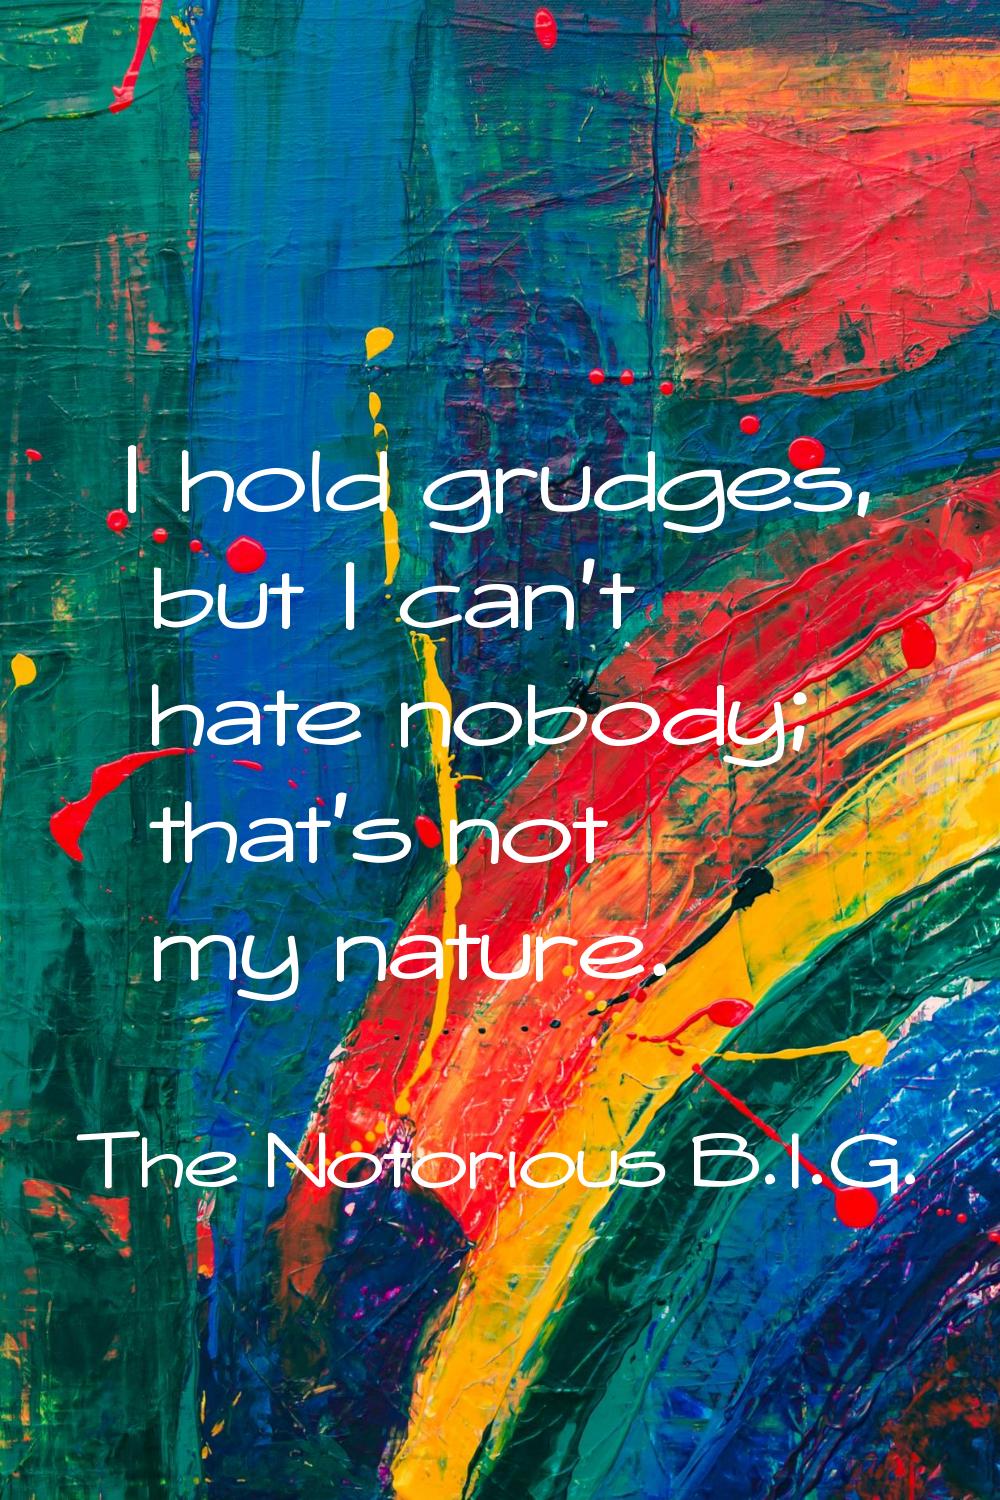 I hold grudges, but I can't hate nobody; that's not my nature.